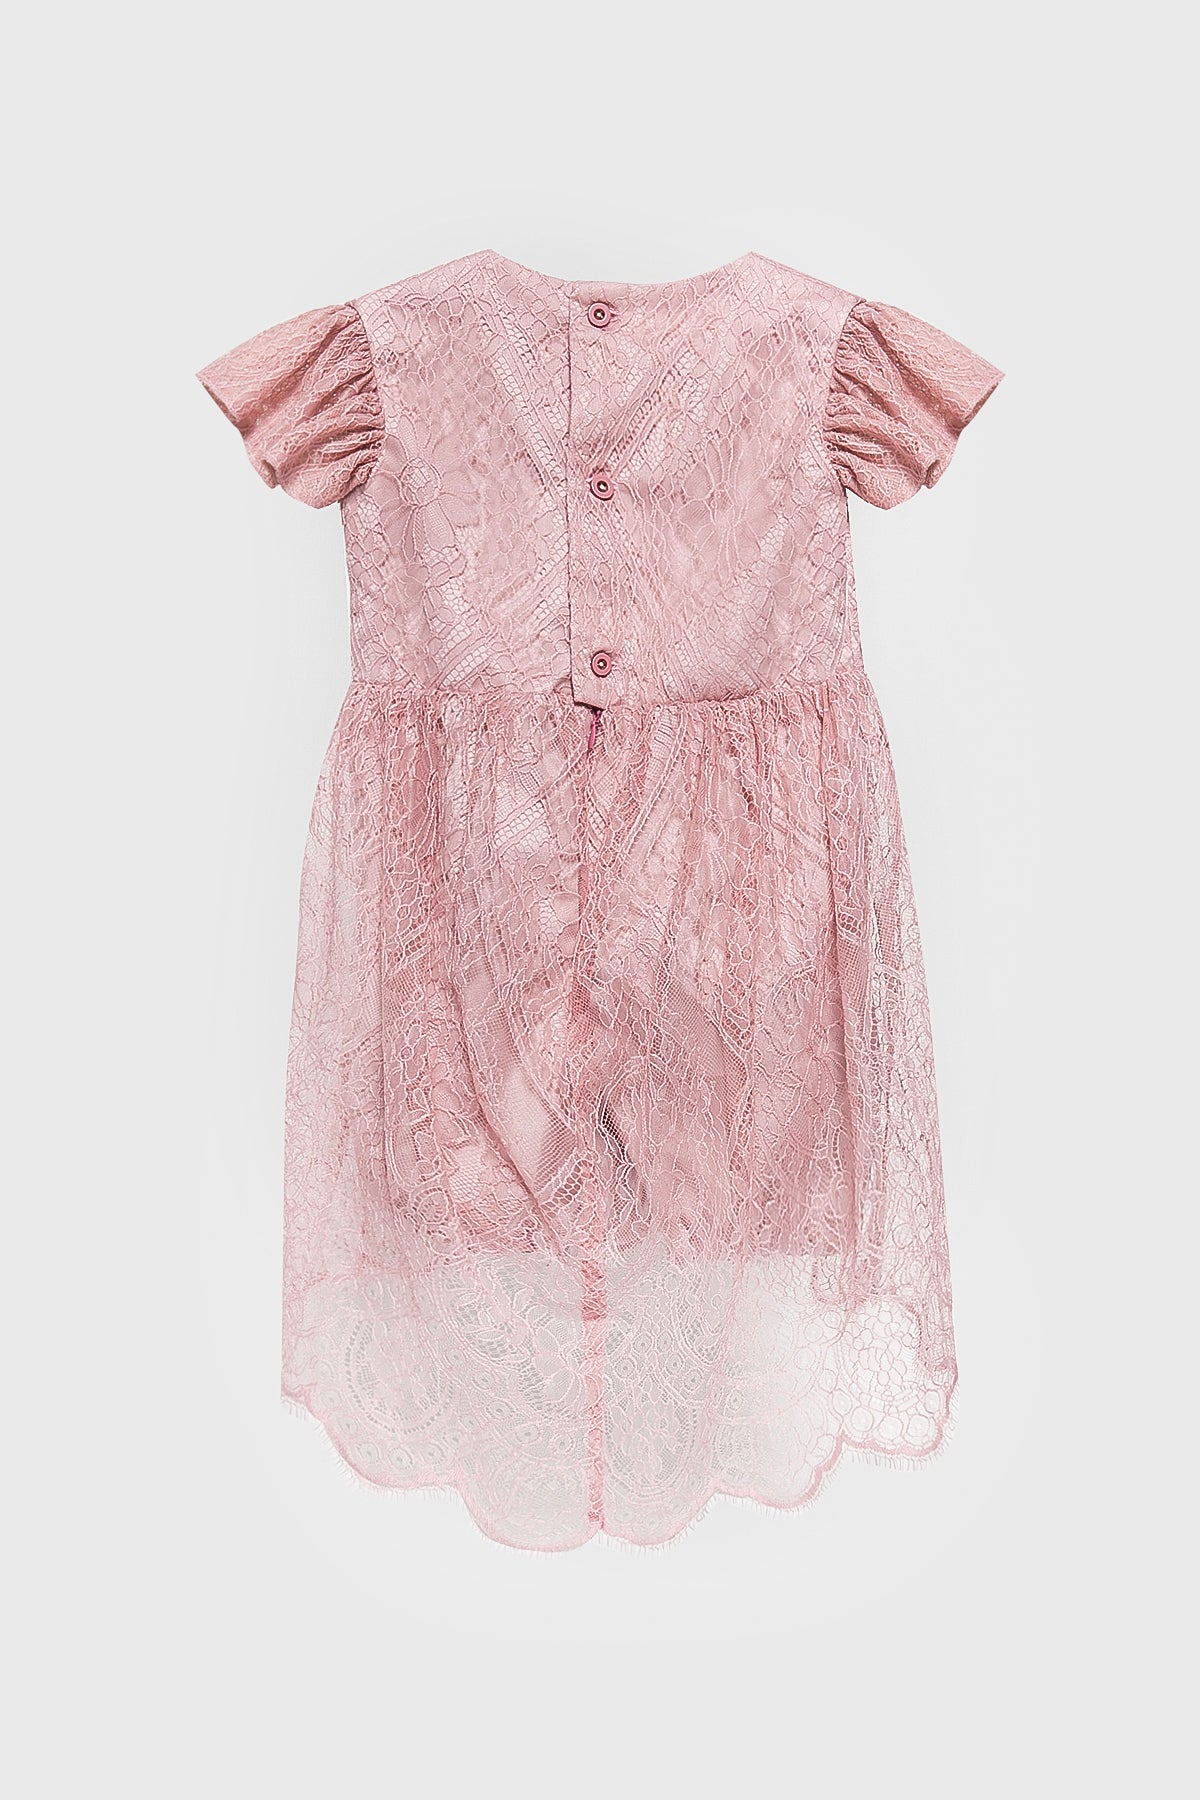 Mia Playsuit in Soft Pink